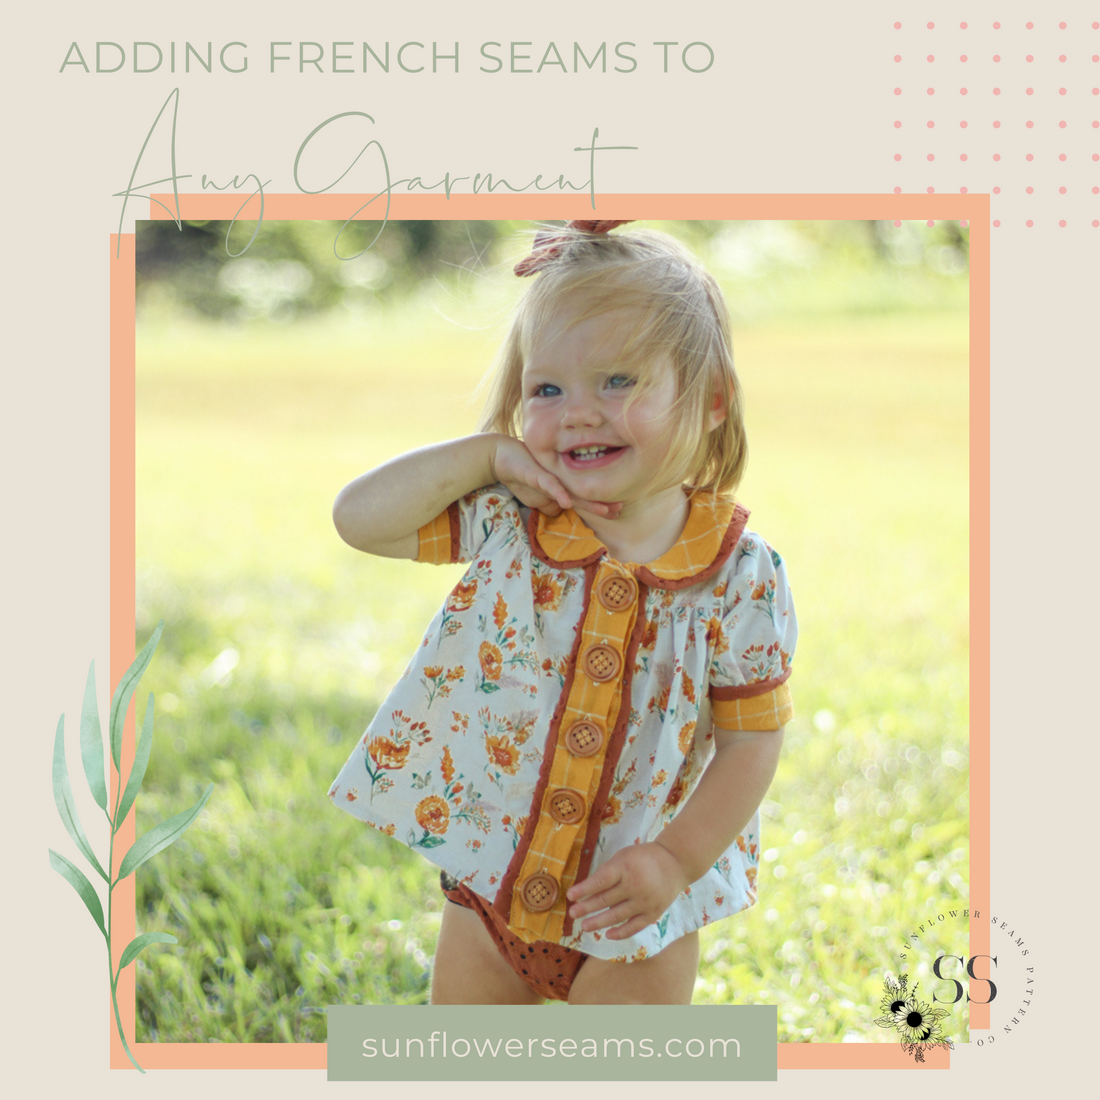 Adding French Seams to Any Garment {A Tutorial}